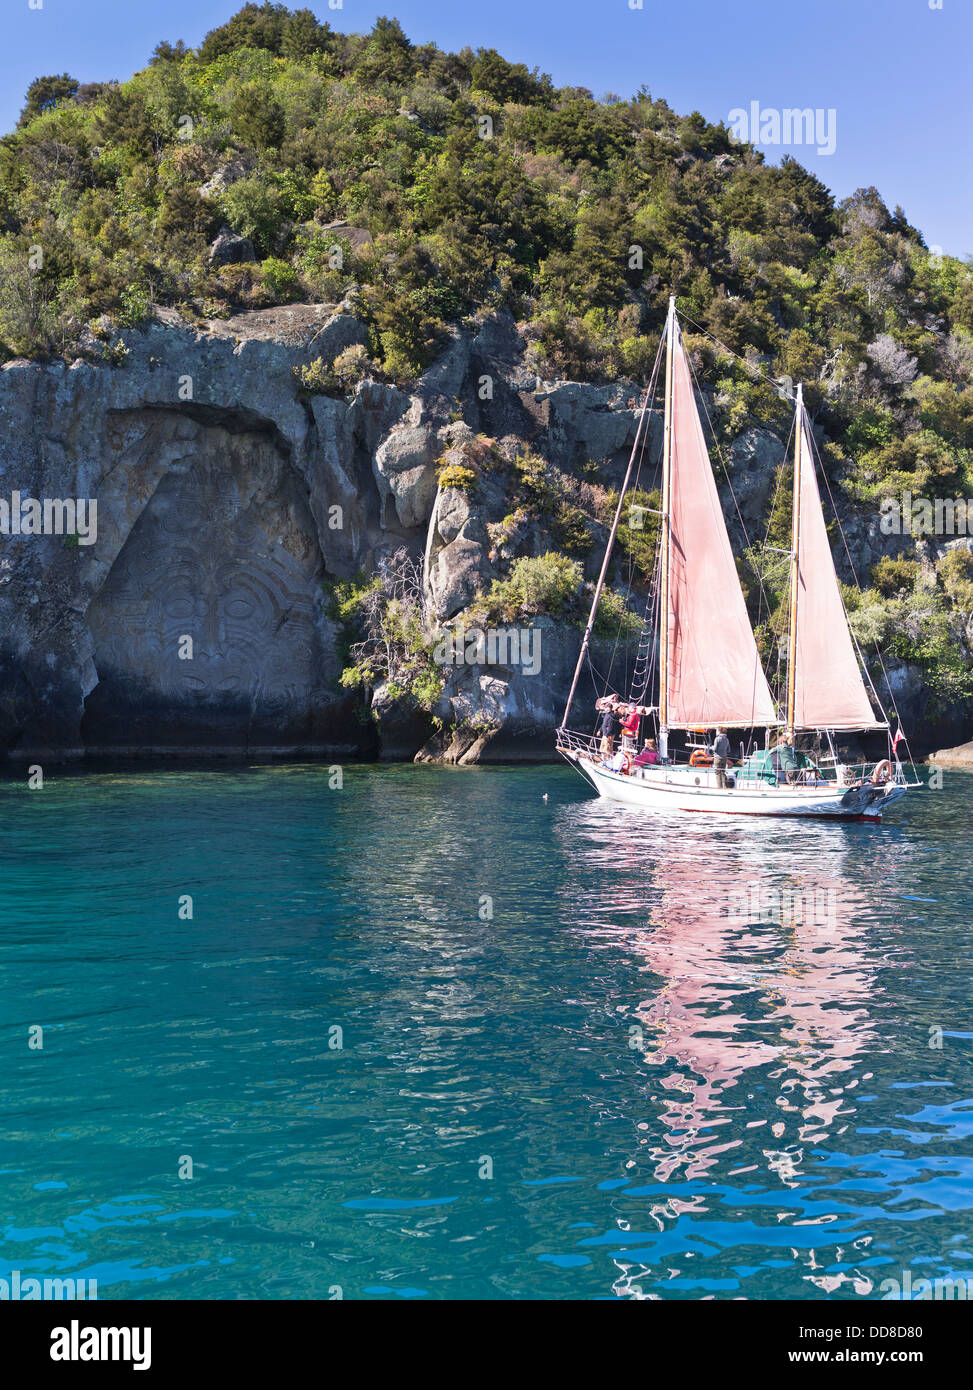 dh  LAKE TAUPO NEW ZEALAND Fearless sailing boat trip tourists Maori rock carving tourism sight seeing Stock Photo